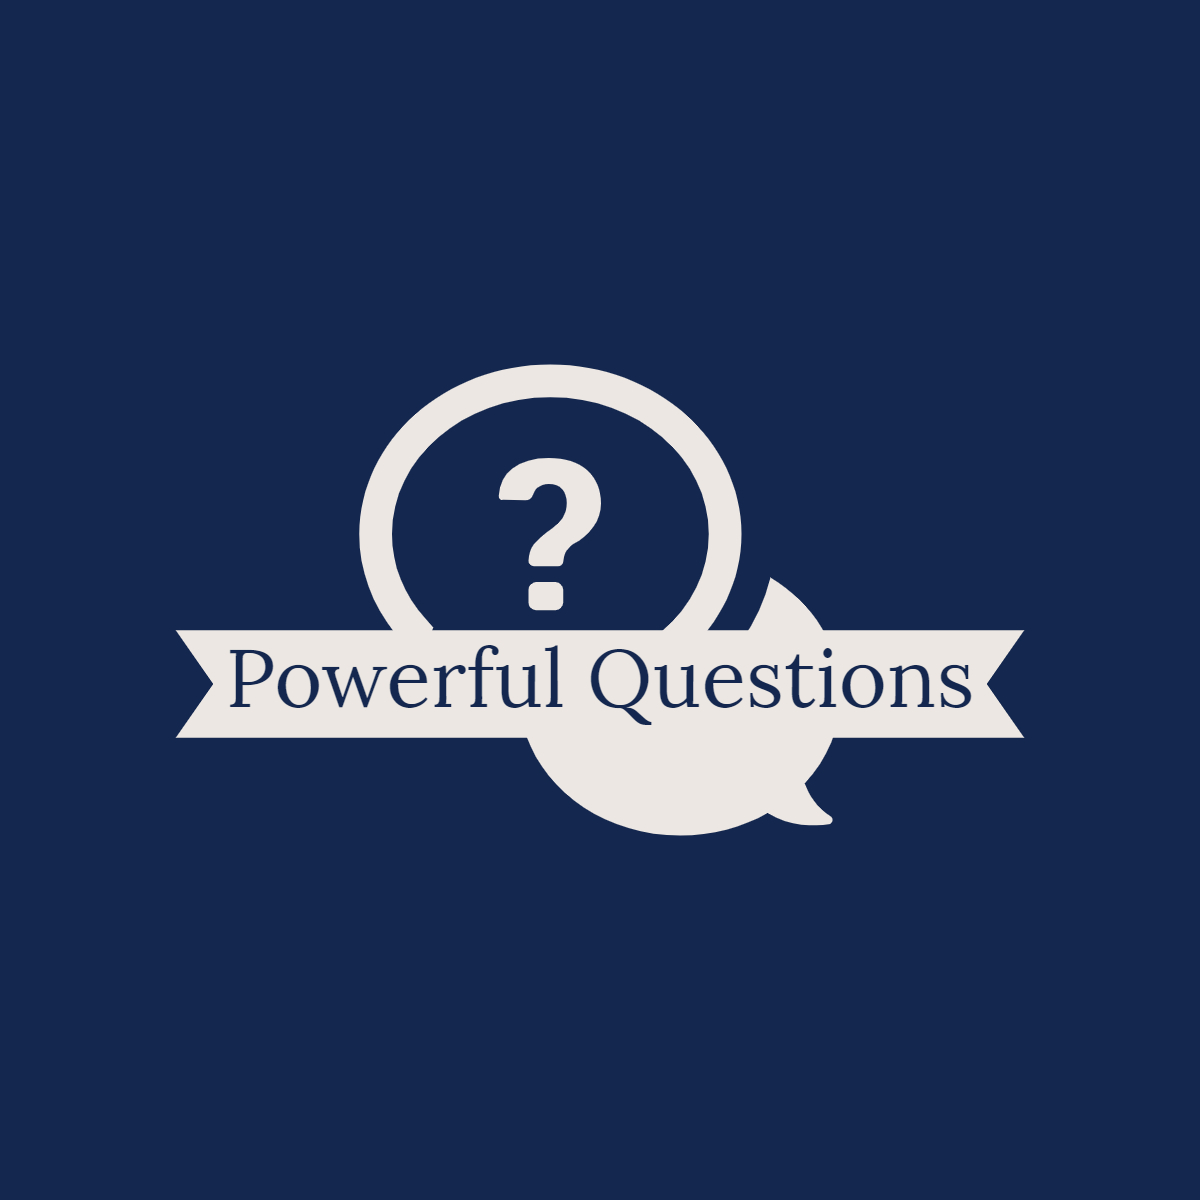 The Powerful Questions logo